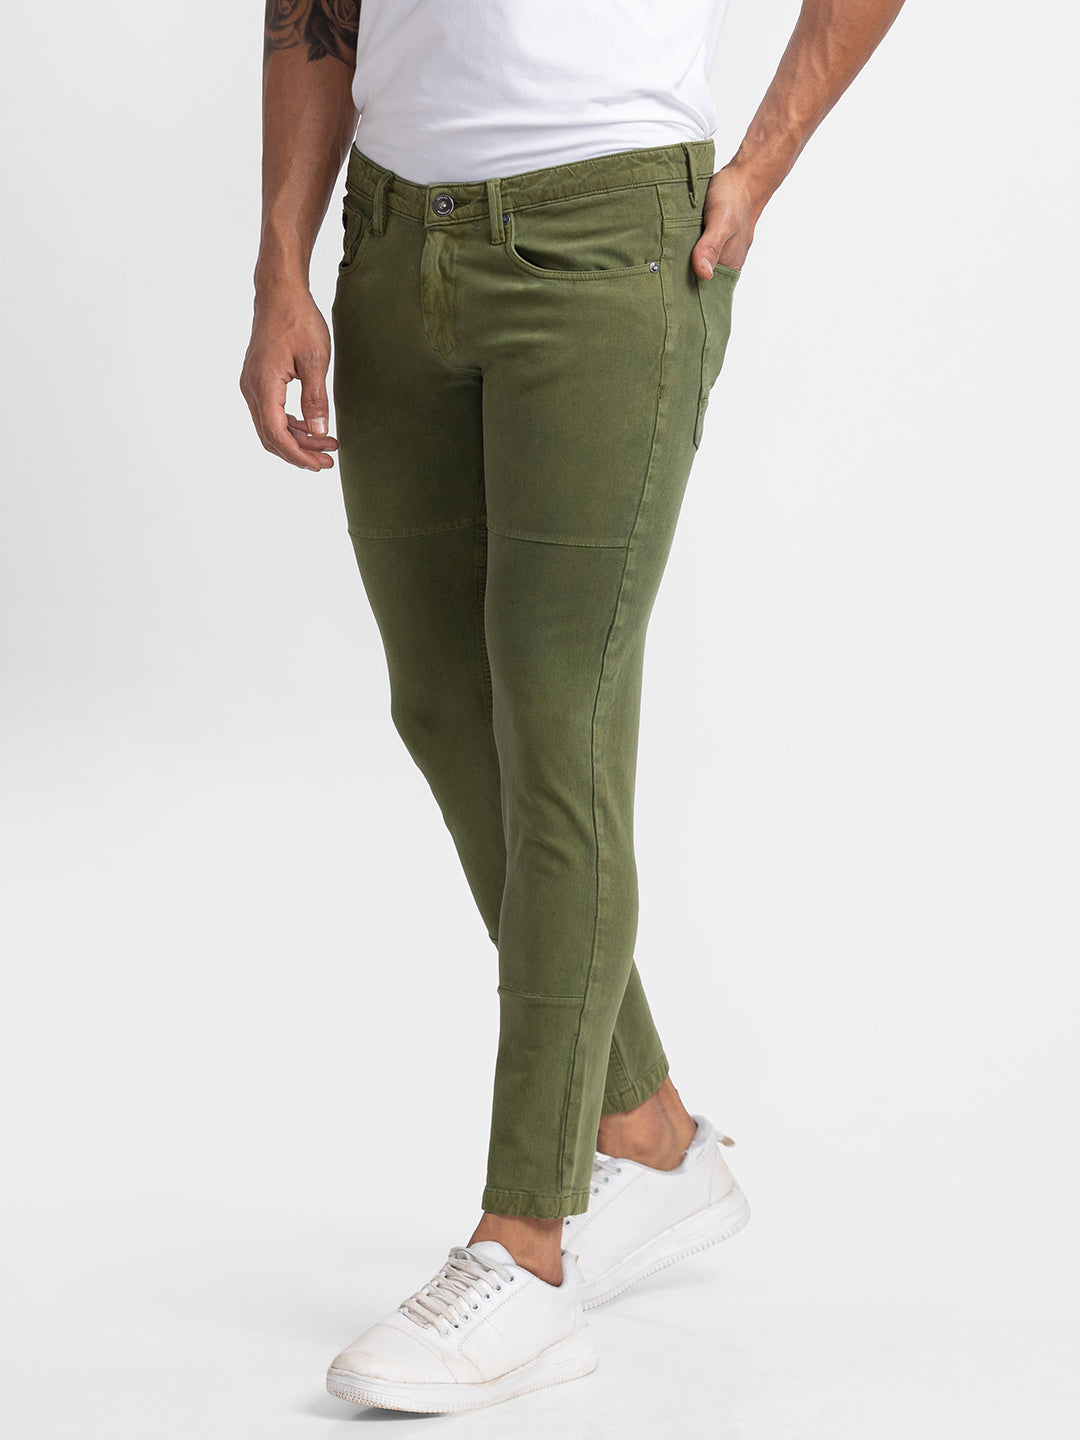 Spykar Olive Green Cotton Slim Fit Tapered Length Trousers For Men